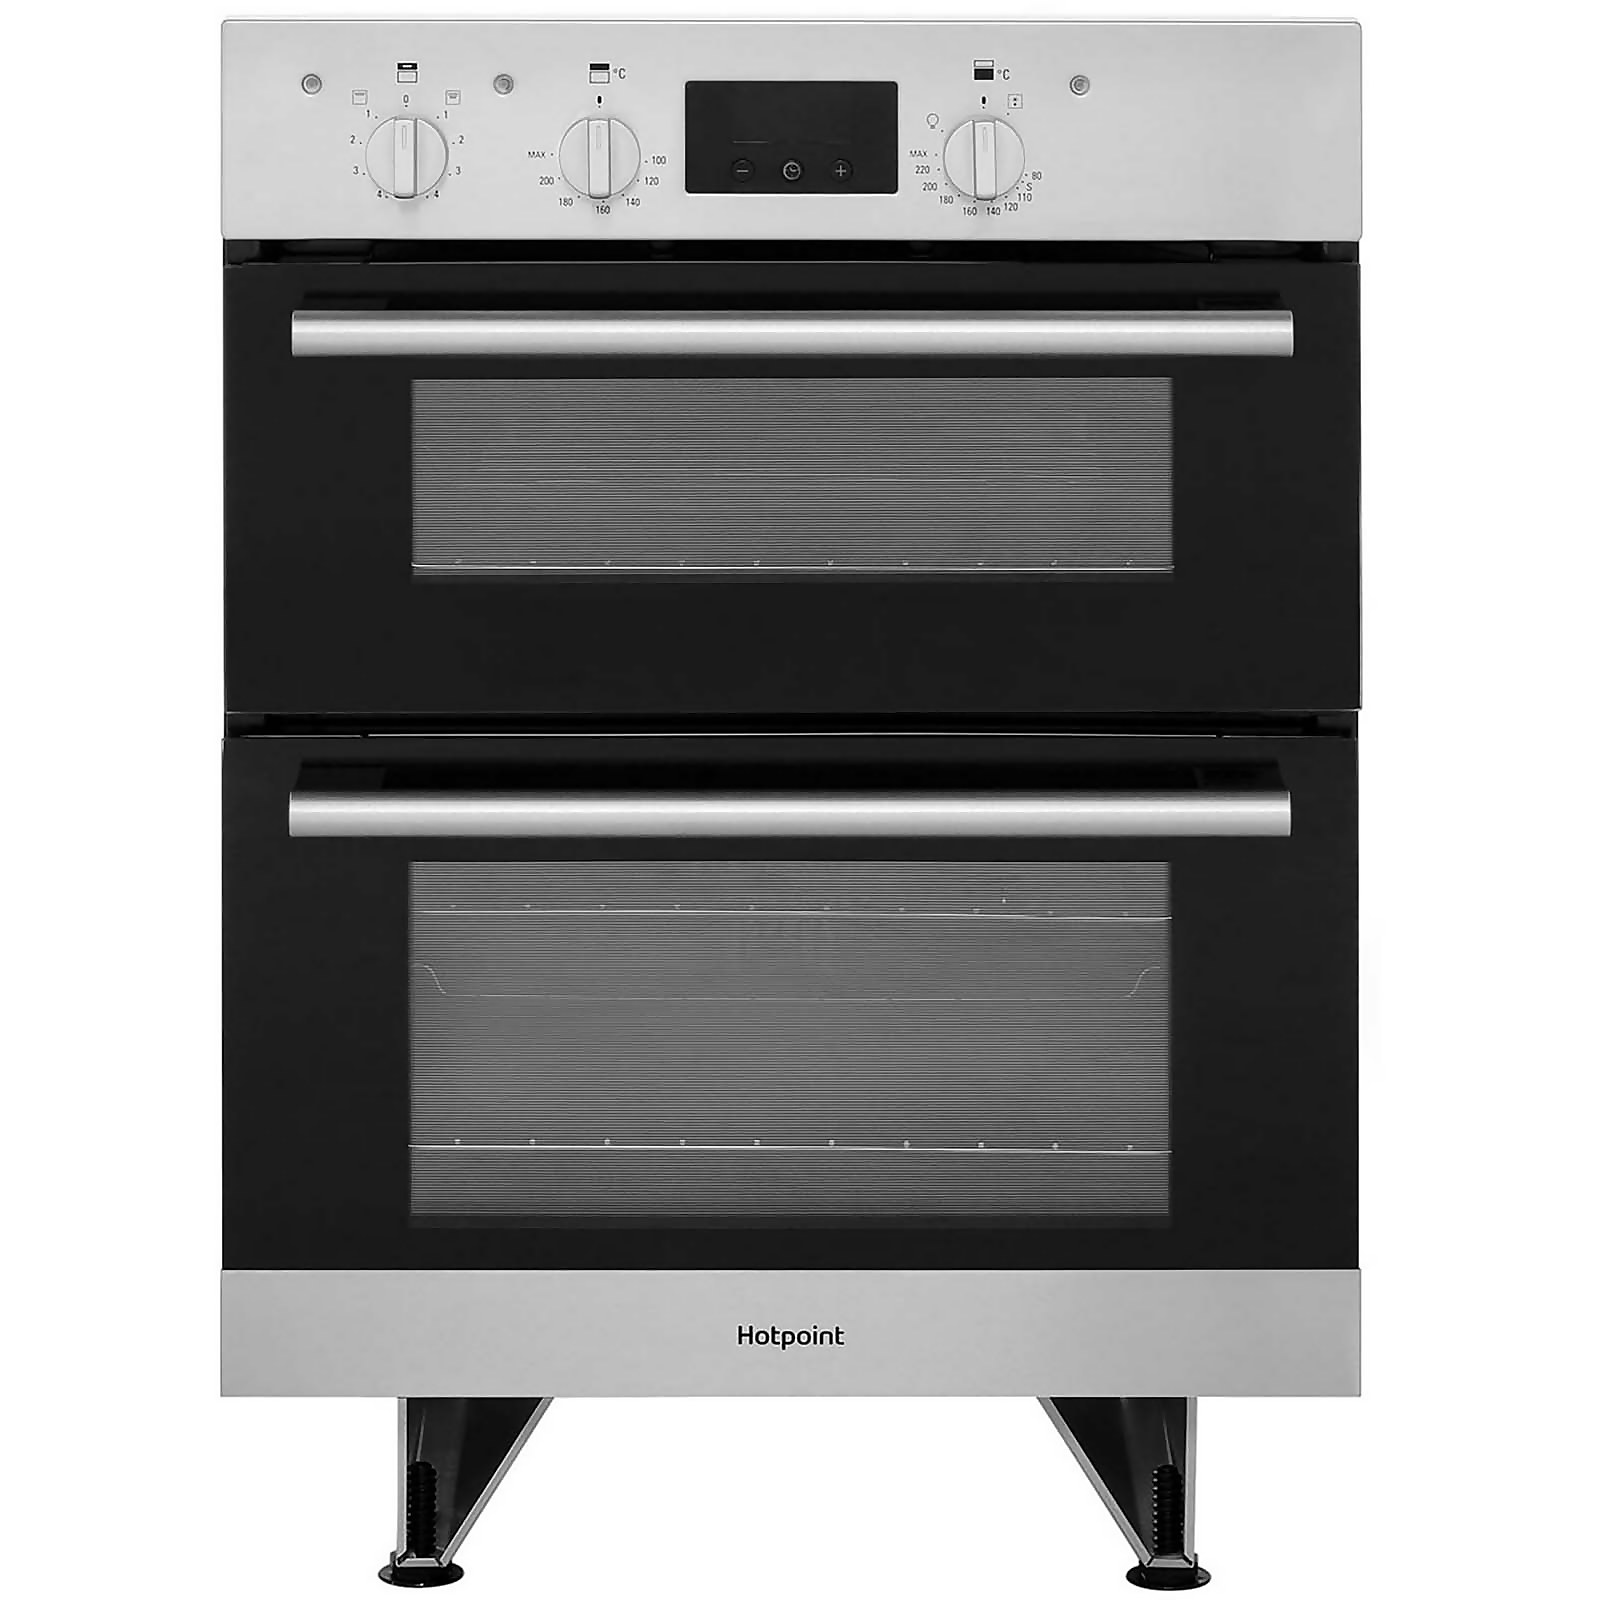 Hotpoint Class 2 DU2540IX Built Under Electric Double Oven With Feet - Stainless Steel